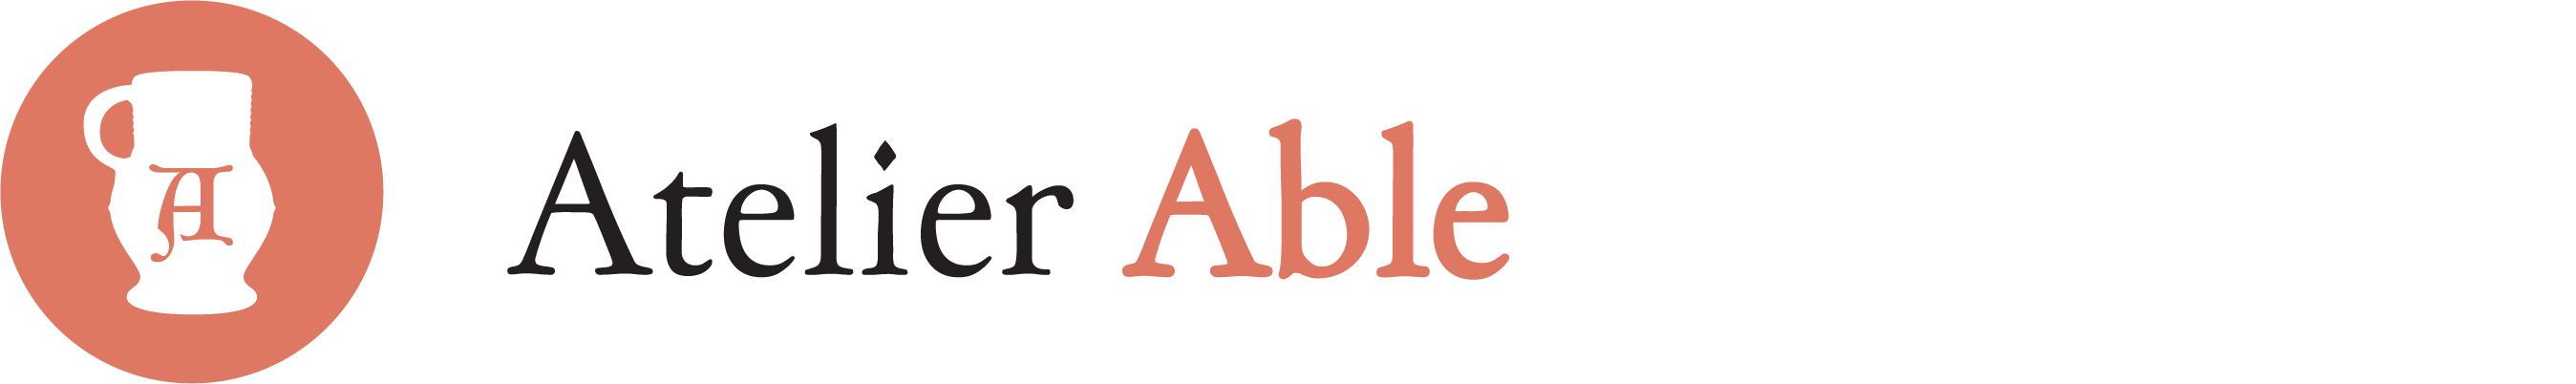 Atelier Able